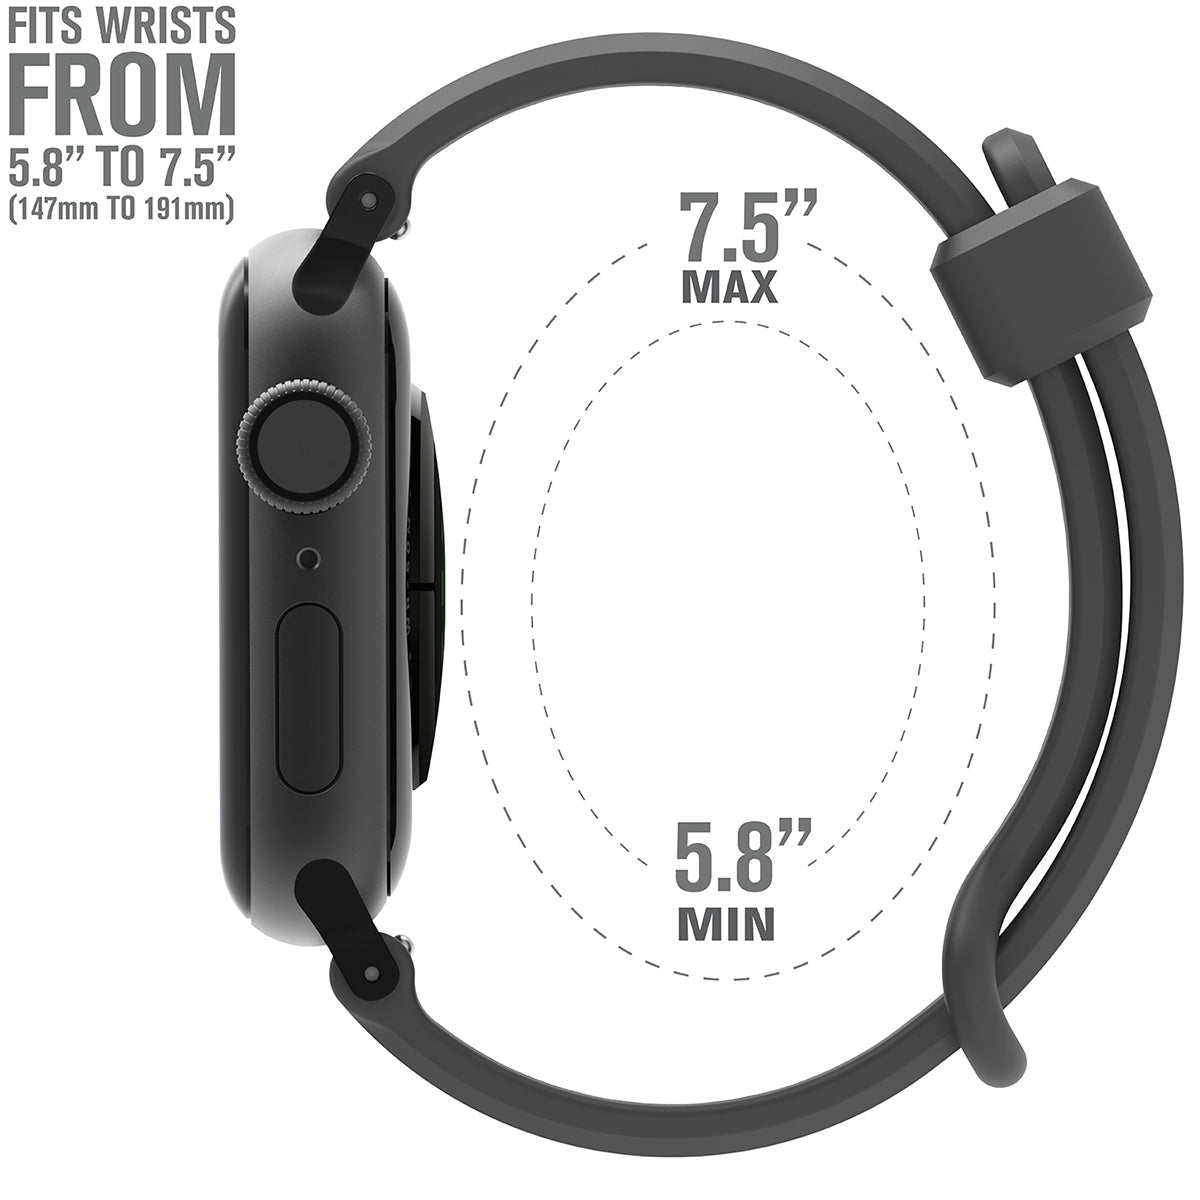 catalyst apple watch series 9 8 7 6 5 4 se gen 2 1 38 40 41mm sports band with apple connector side of apple watch with the minimum and maximum sizes of the sport band space gray text reads fits wrists from 5.8" to 7.5"(147mm to 191mm)